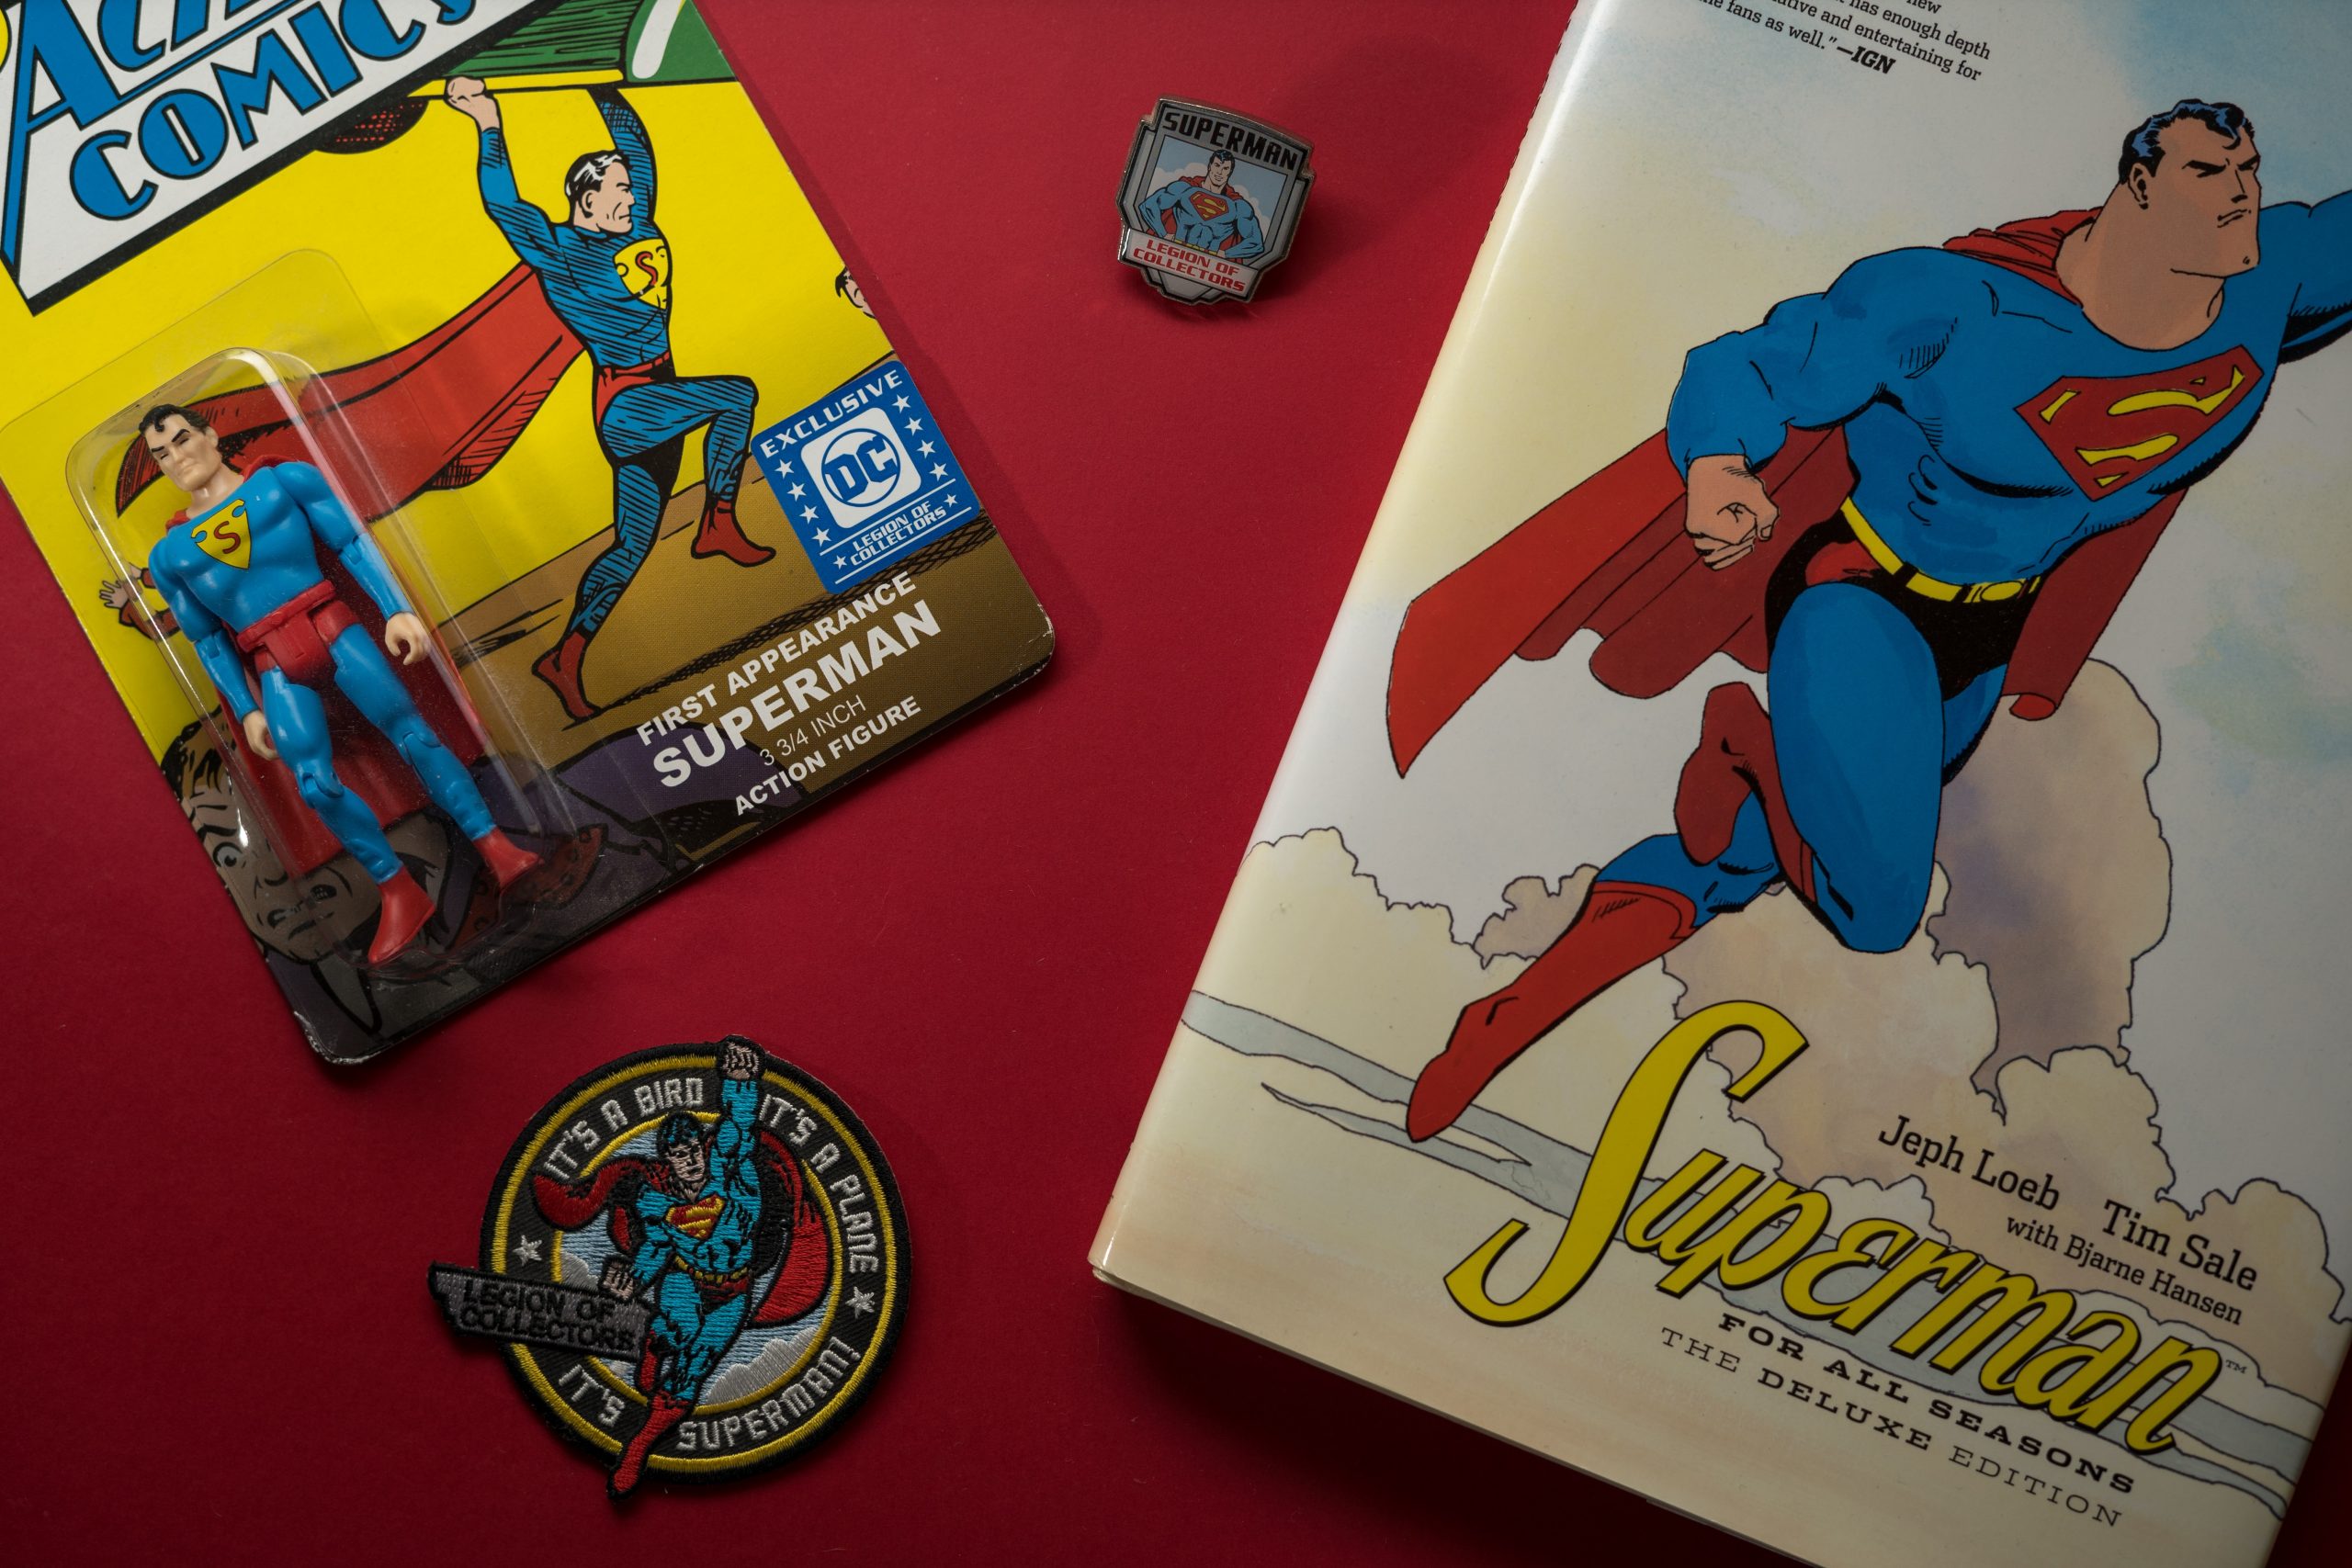 A Superman comic and merchandise lay on a table